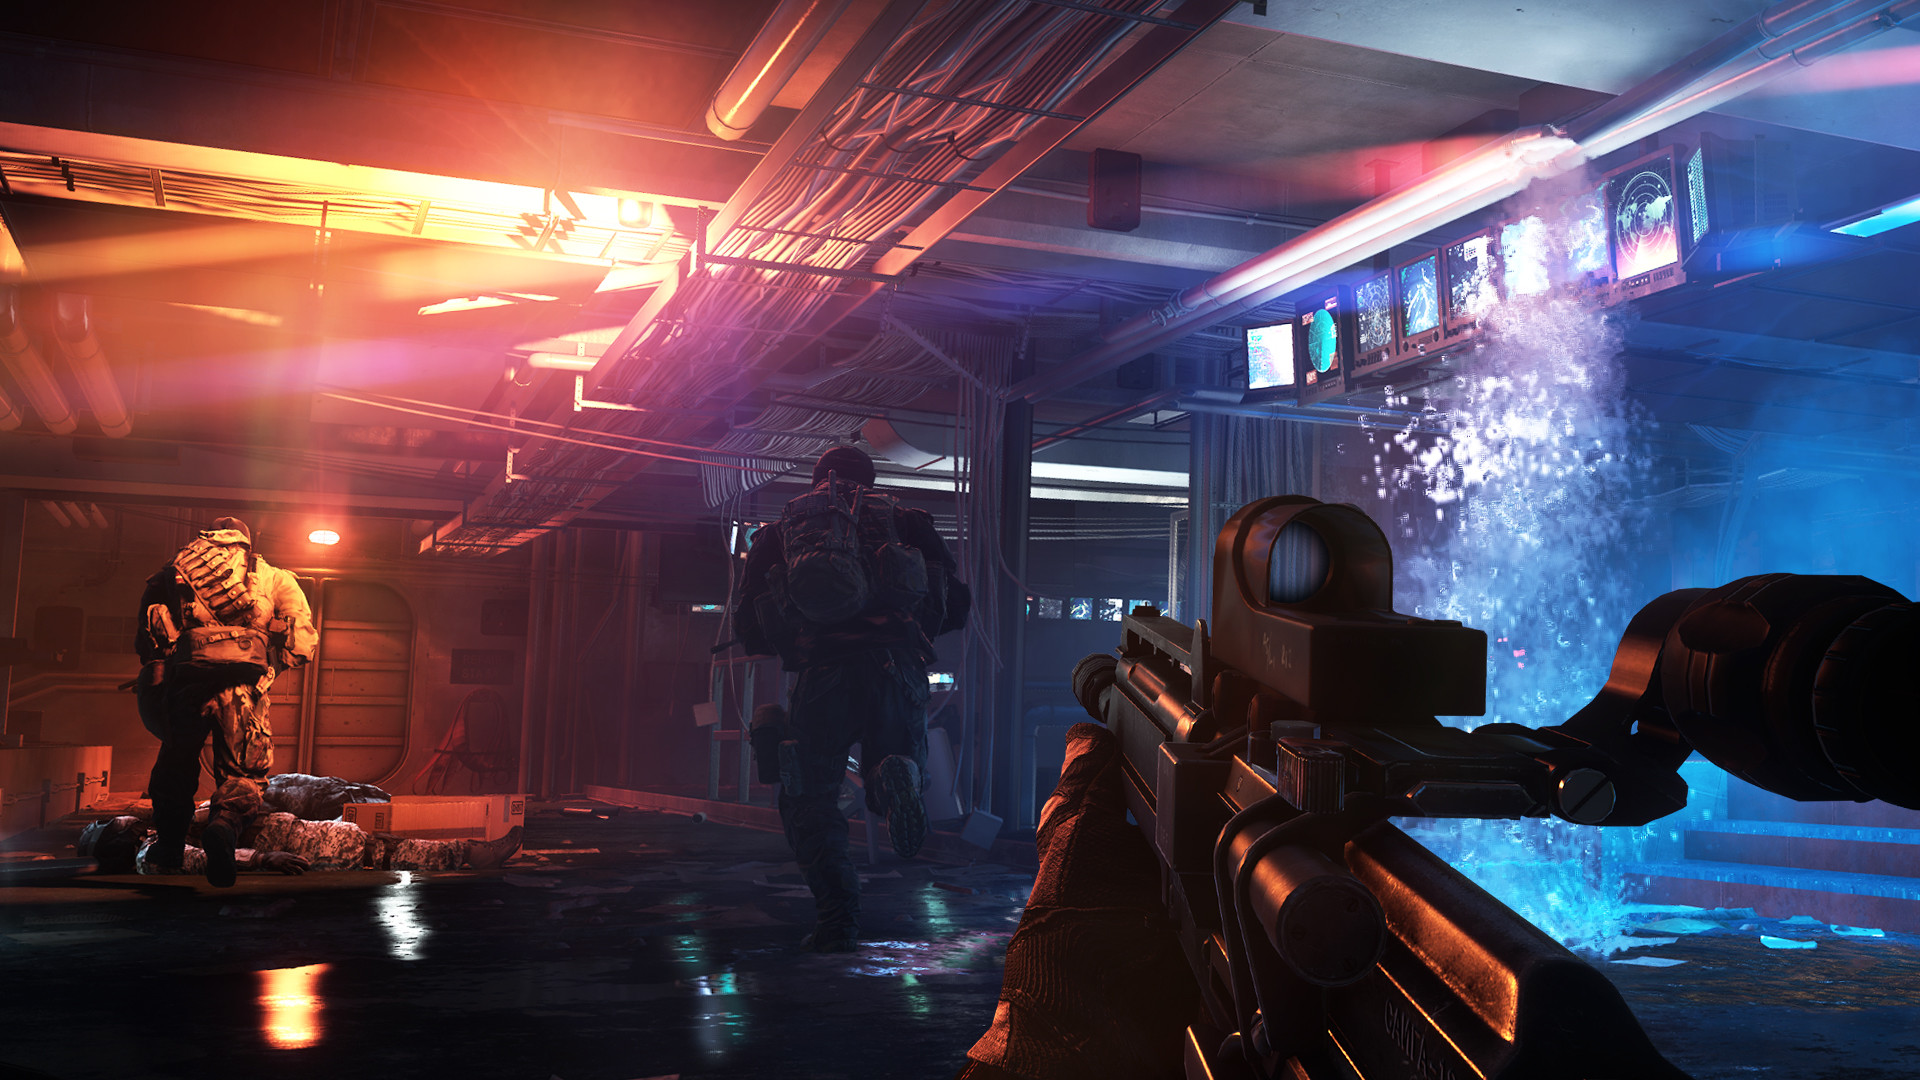 Battlefield 4' will have free download as part of their 'Road to